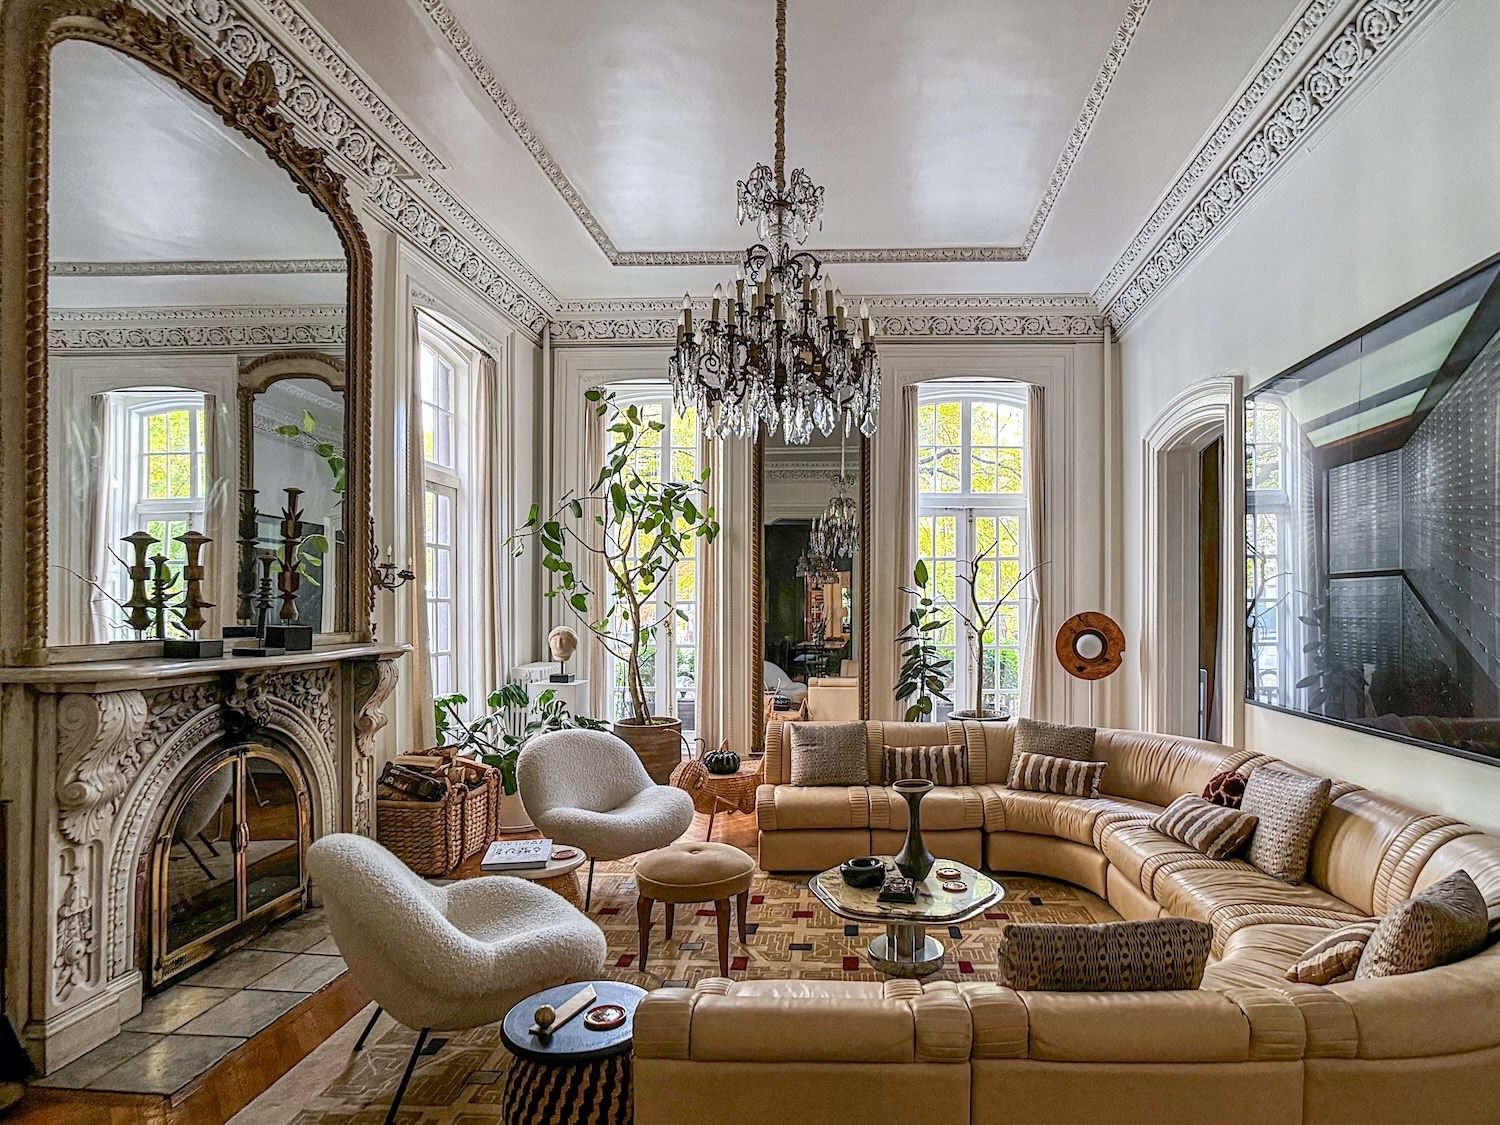 At Home with Sara Story in her Gramercy Park Brownstone